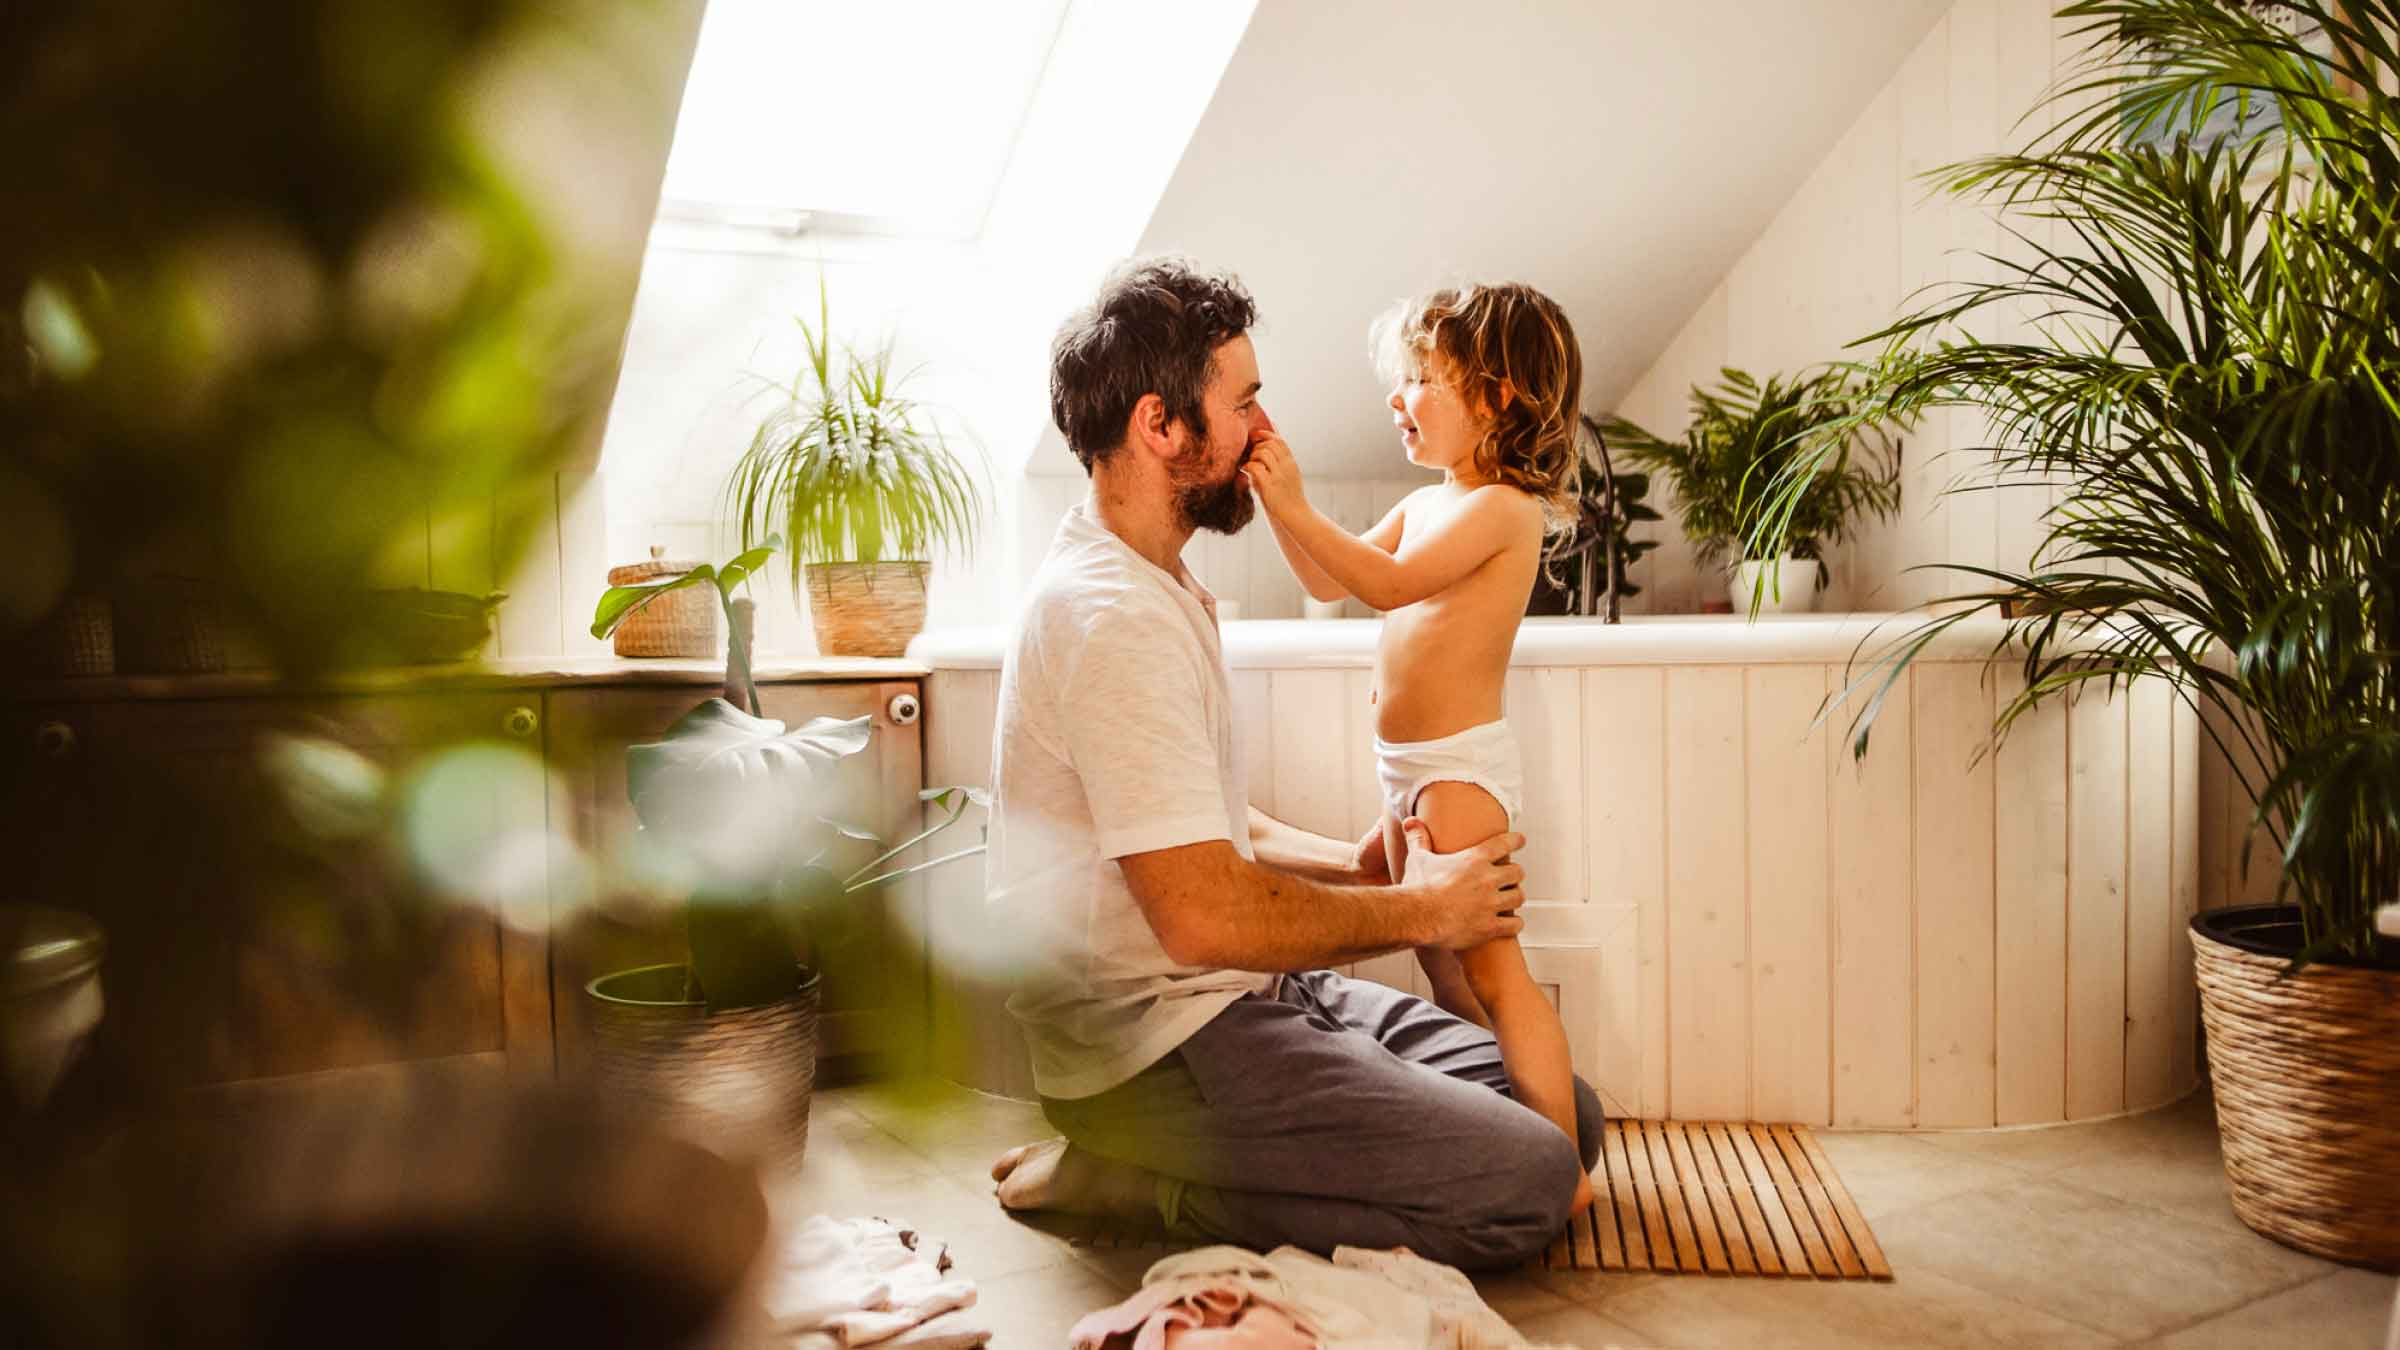 Parent kneels beside bath tub while a child tweaks his nose. Green house plants are dotted around the bathroom.